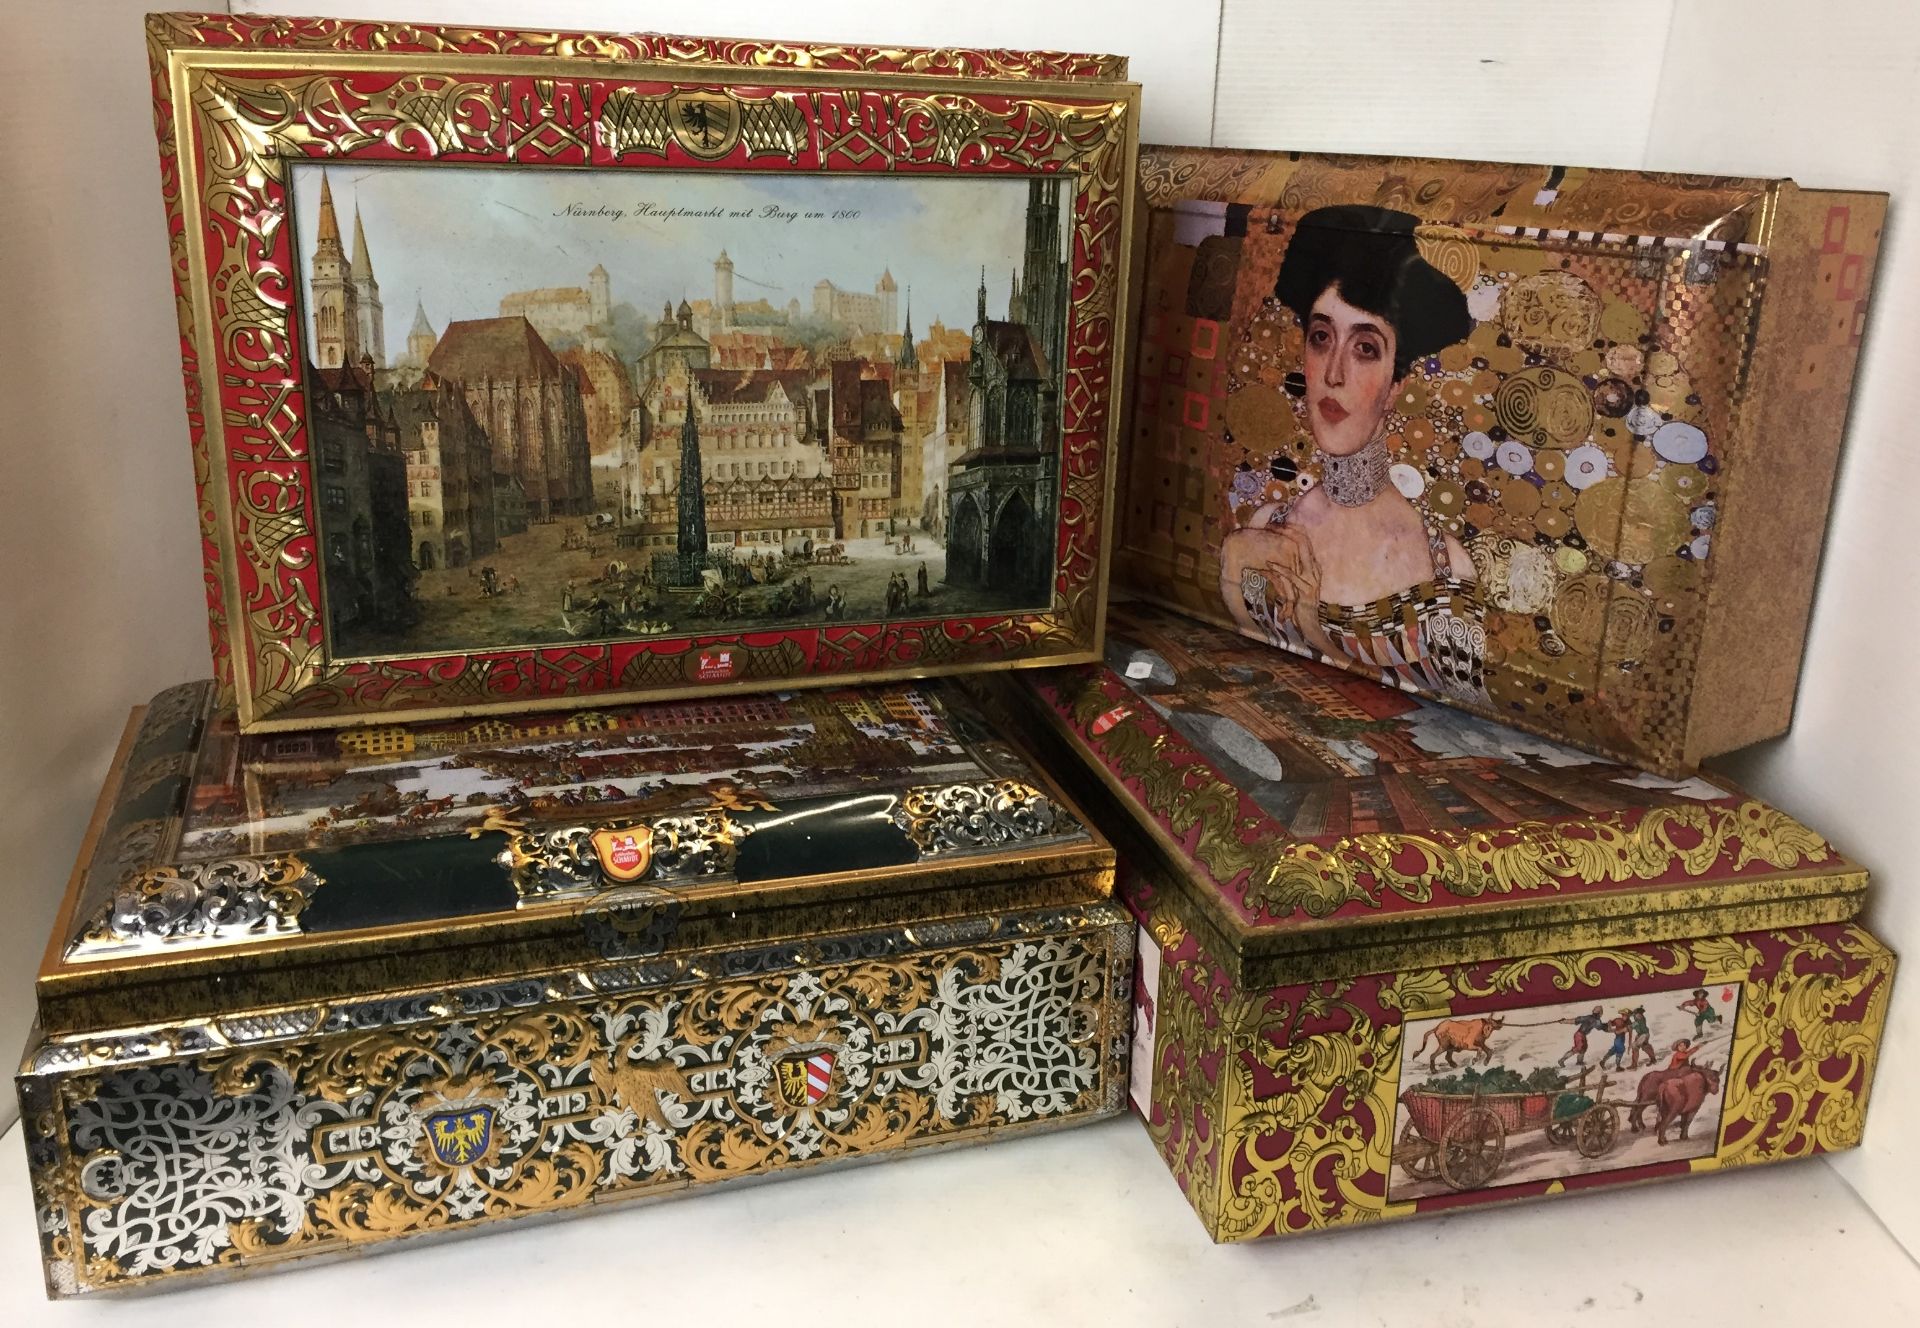 Four large lidded tin chests 42x30x16cm high and 37x26x13cm high all stamped Nurnberg Germany,